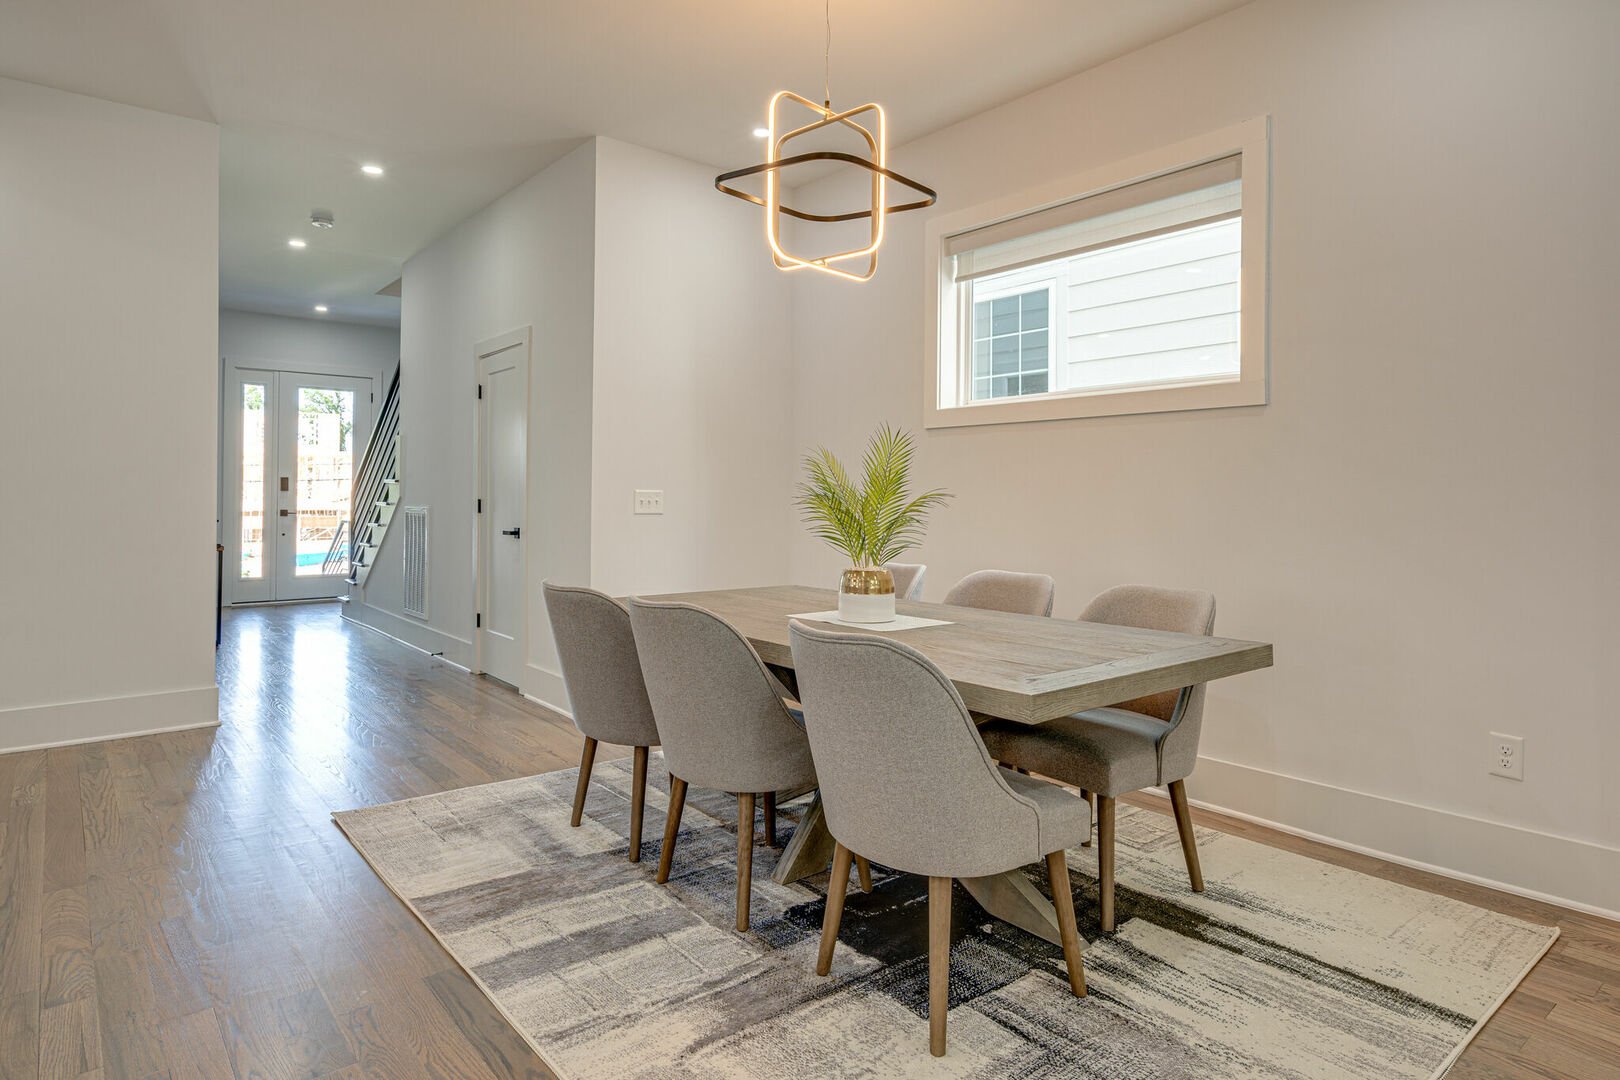 1st Floor: Gourmet style kitchen featuring all stainless steel appliances, coffee bar, wine fridge, breakfast bar, and formal dining area that seats 6.